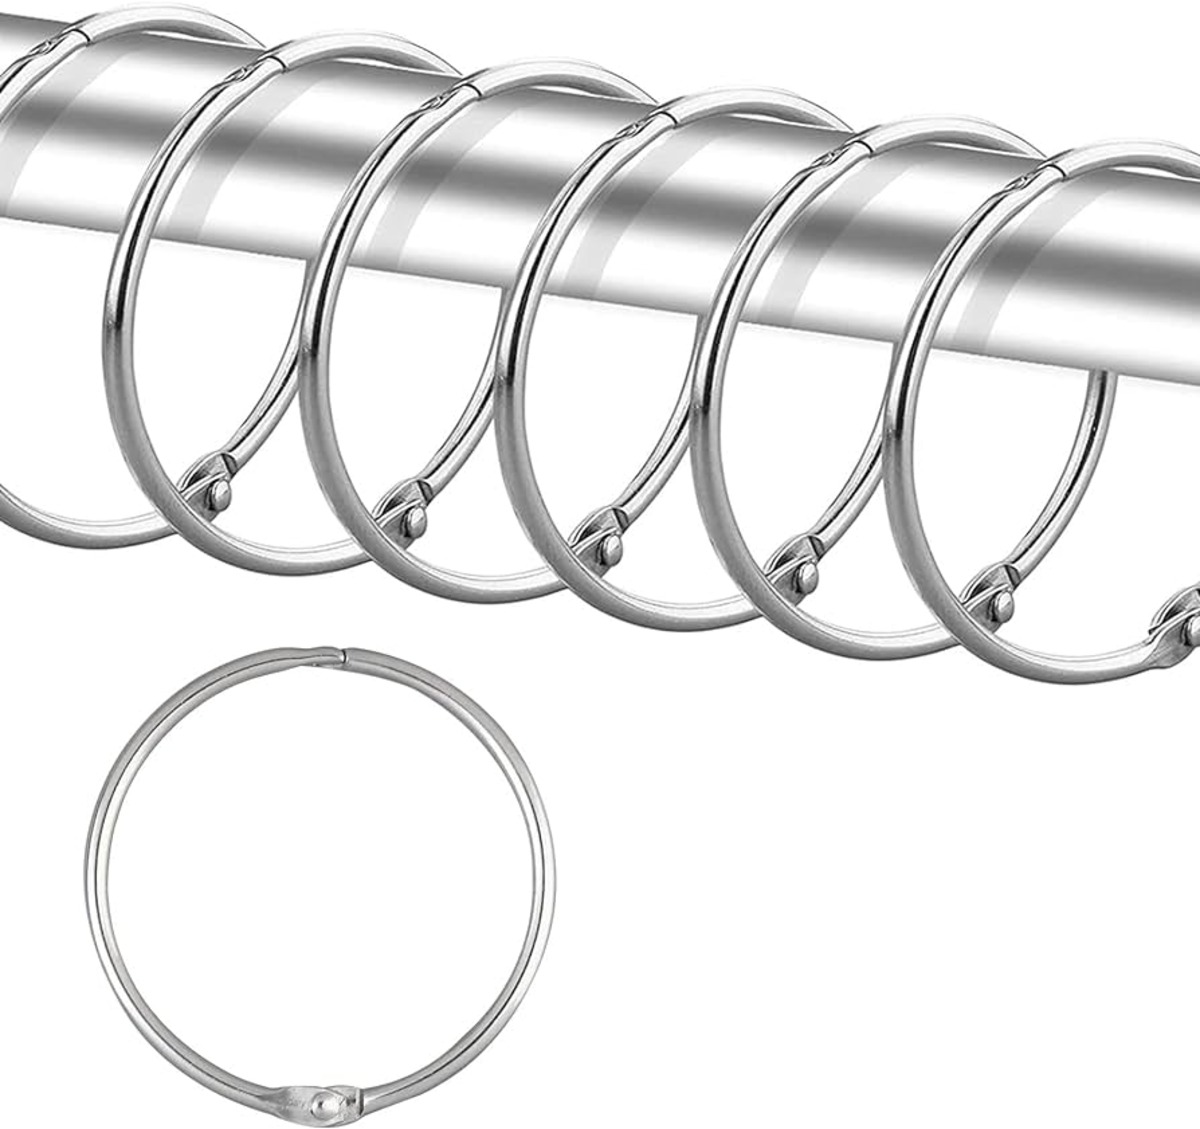 11 Incredible Shower Curtain Rings for 2023